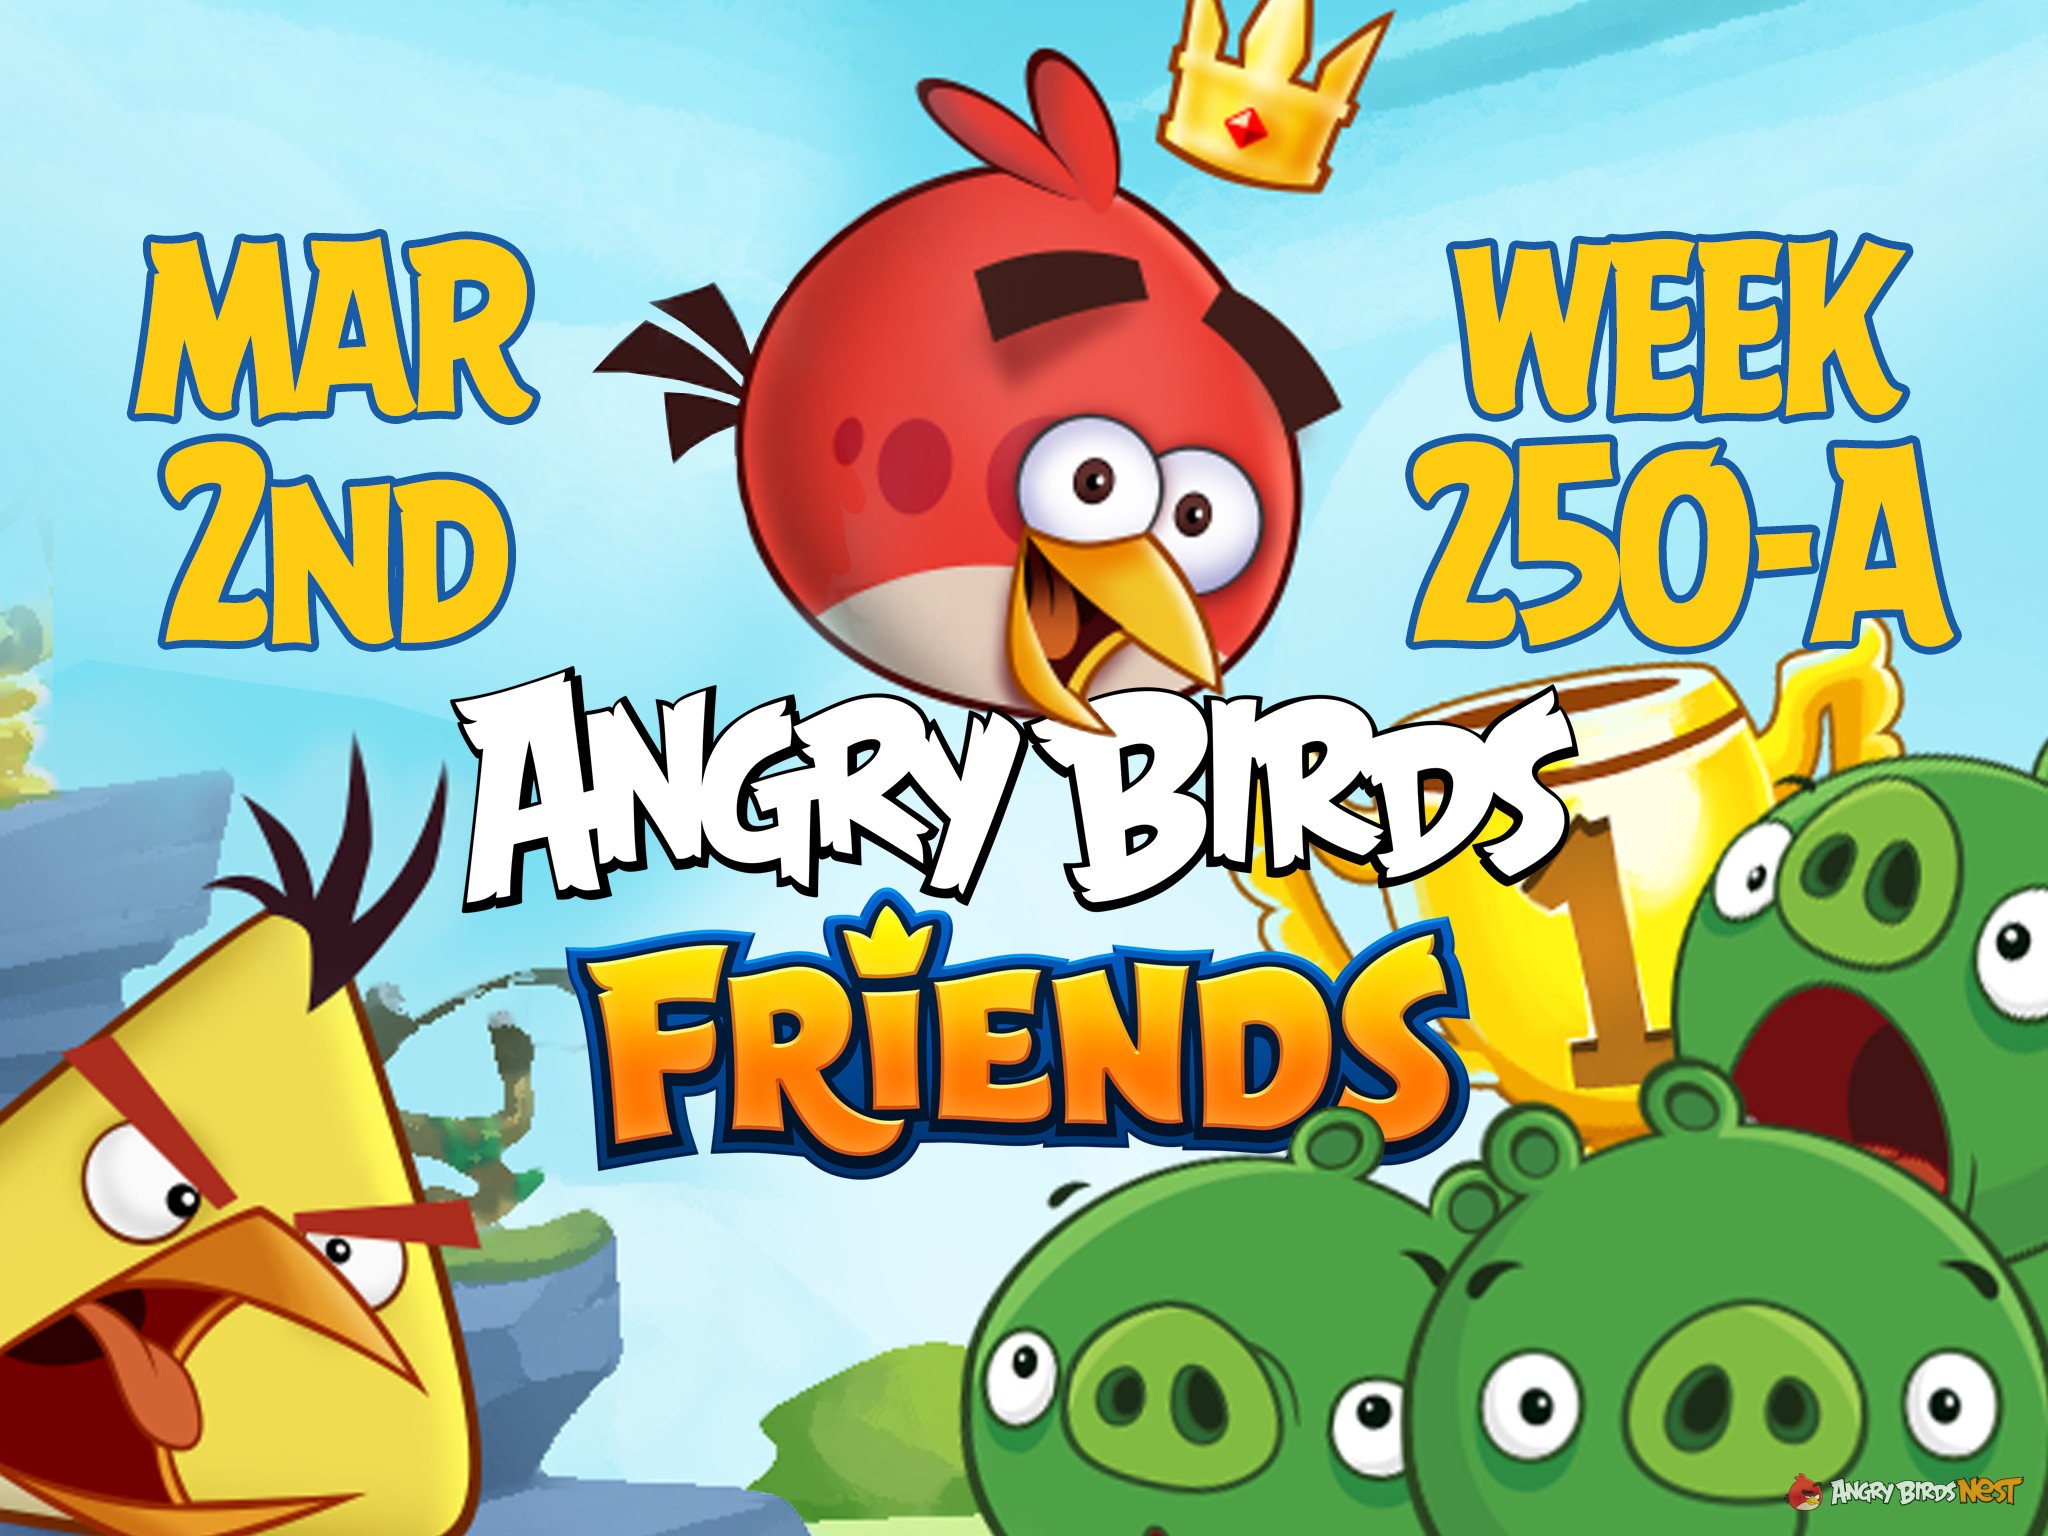 Angry Birds Friends Tournament Week 250-A Feature Image